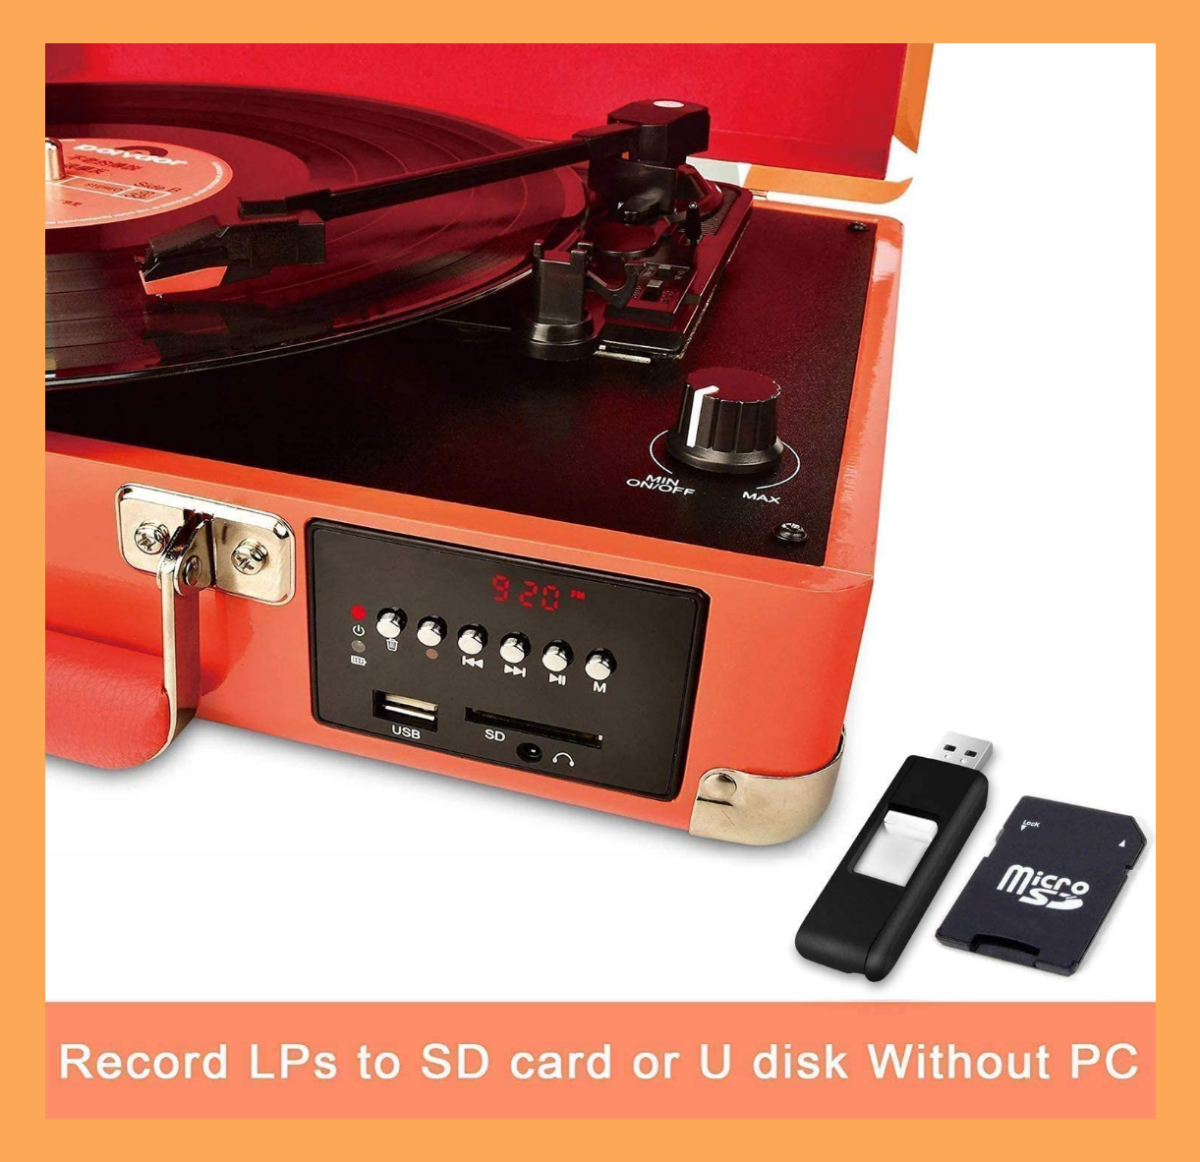 A Digitnow Suitcase Record Player with USB stick and SD card demonstrating its recording ability